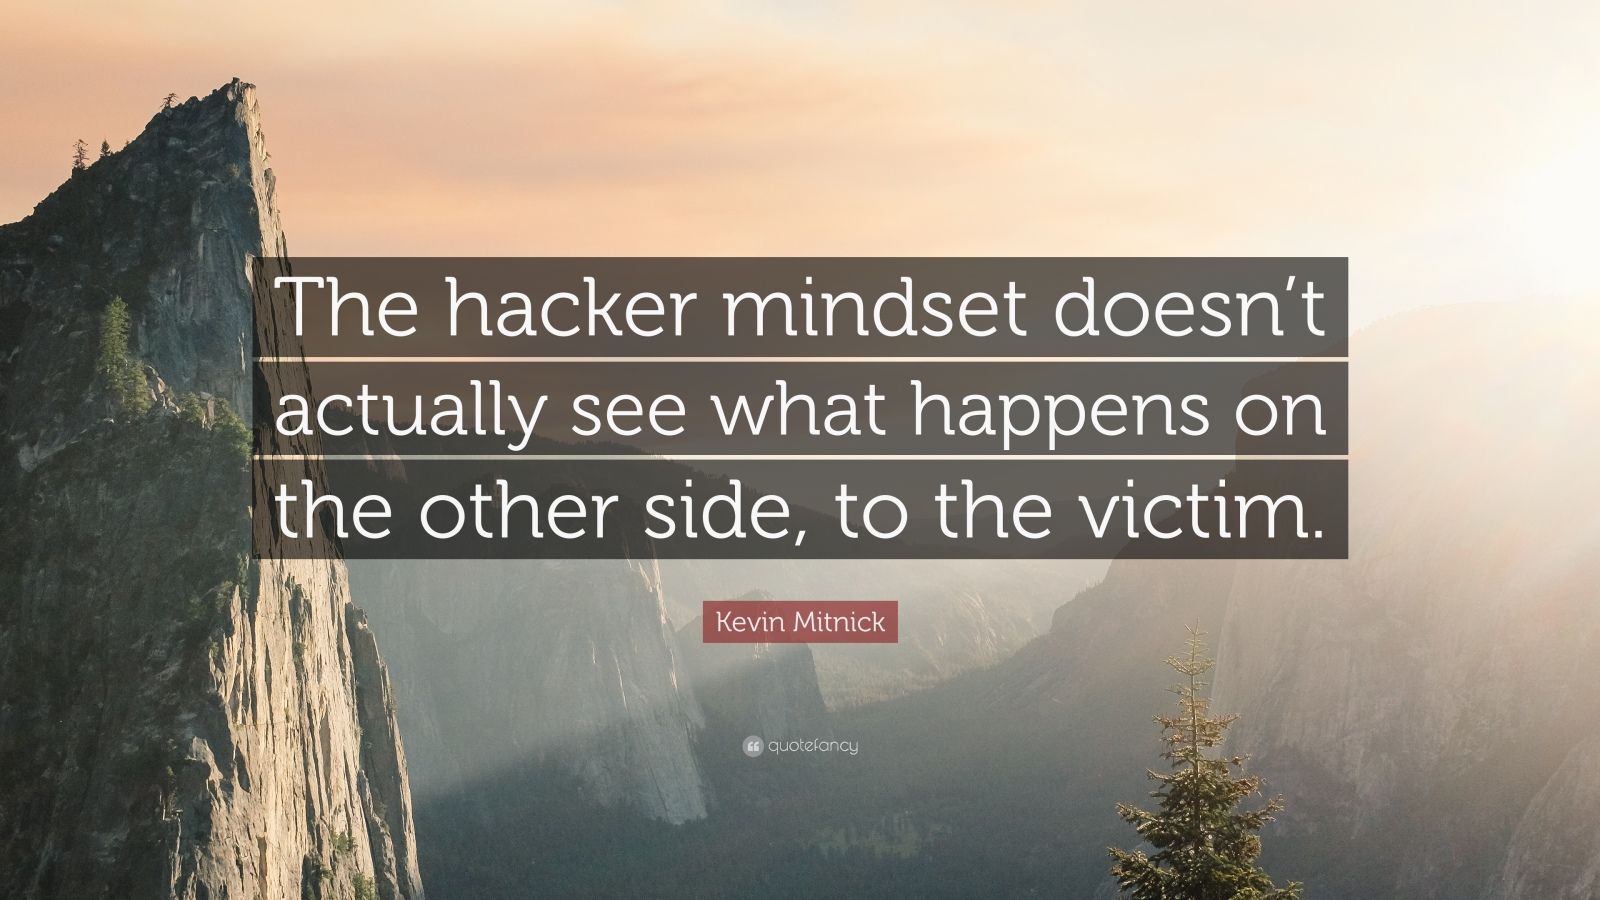 Kevin Mitnick Quote “The hacker mindset doesn’t actually see what